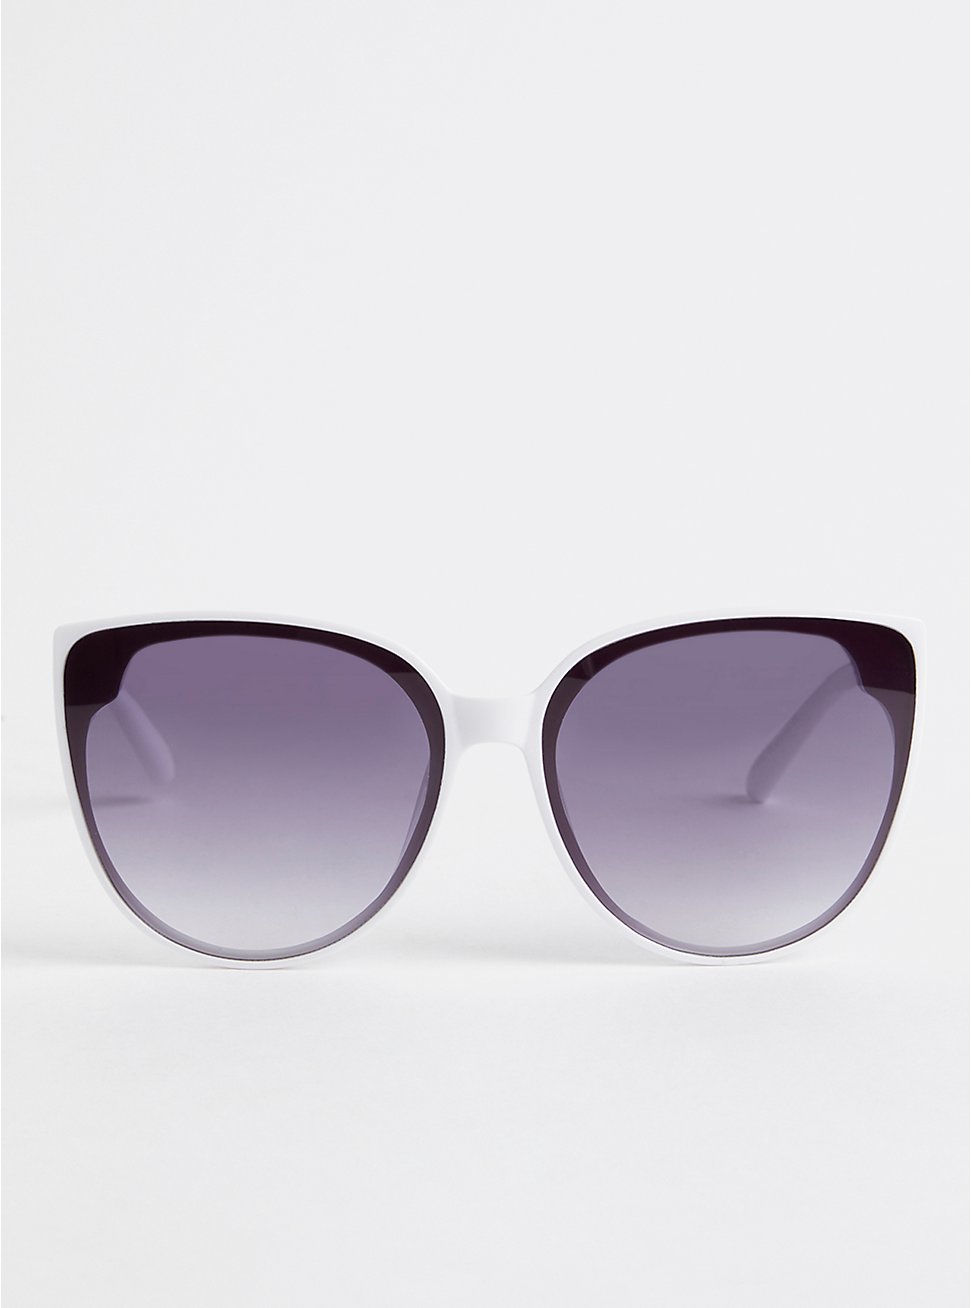 Cateye Sunglasses - White with Gradient Smoke Lens, , hi-res